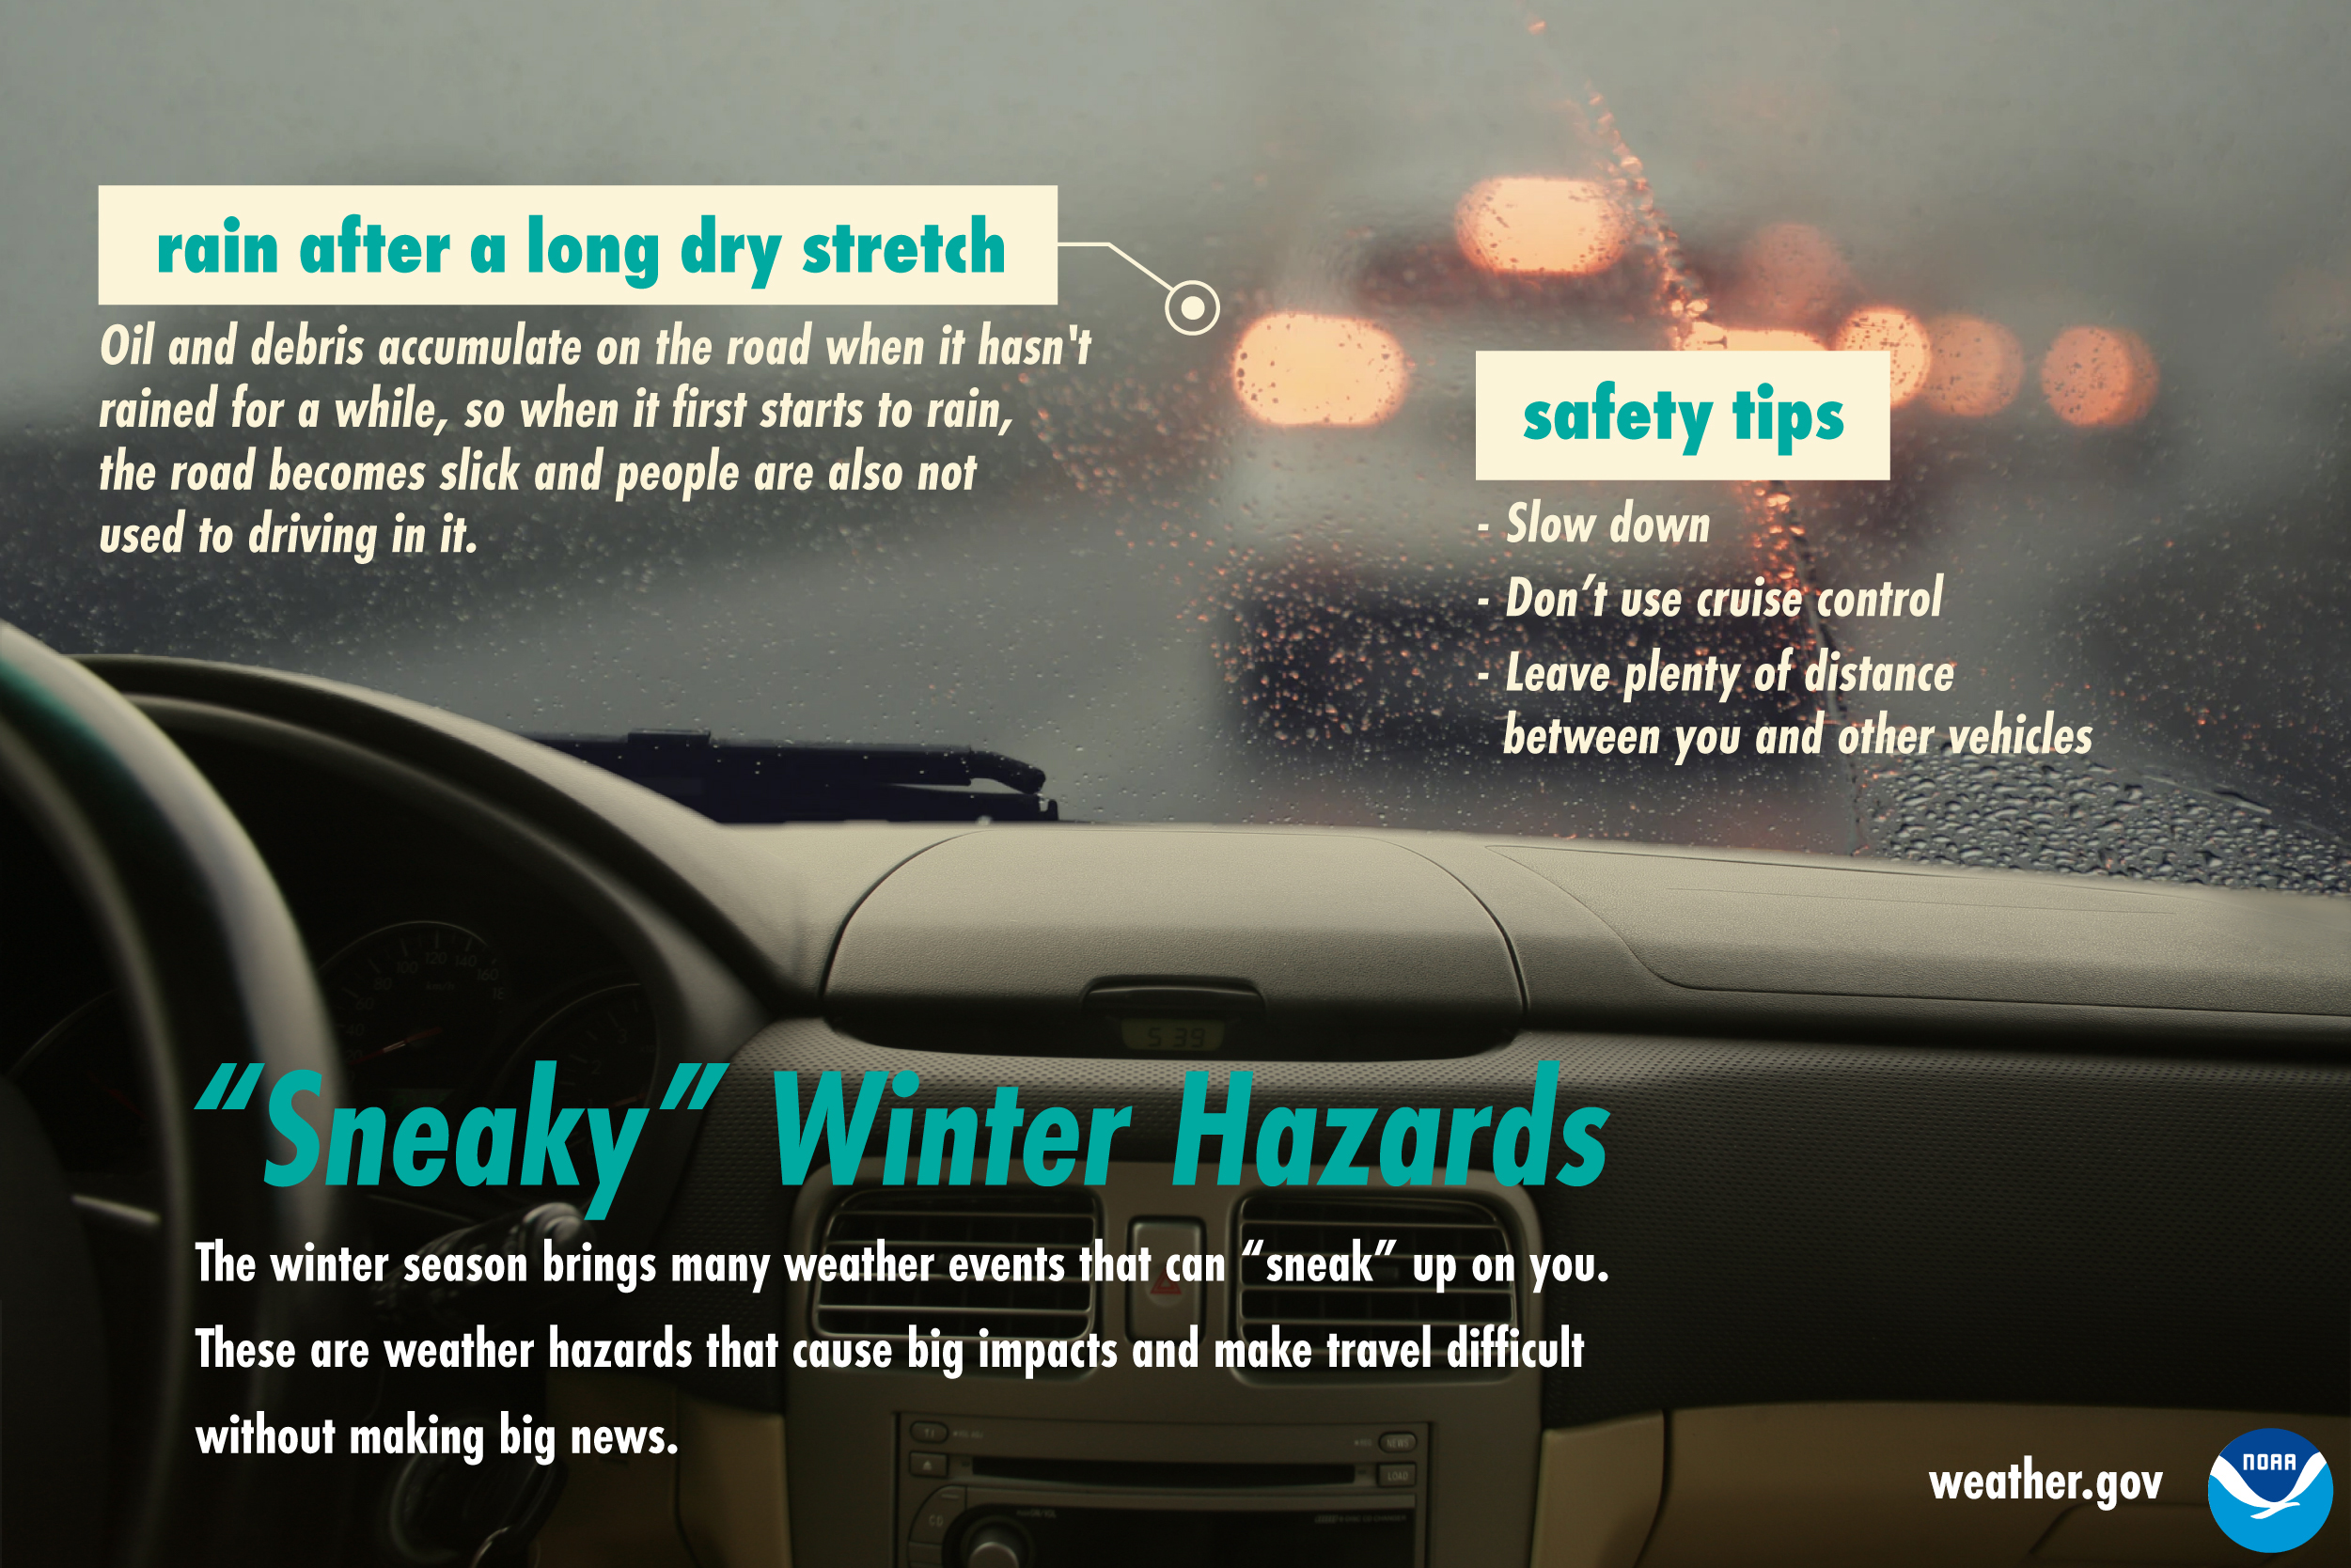 Sneaky Winter Hazards: Rain after a long dry stretch. Oil and debris accumulate on the road when it hasn't rained for a while, so when it first starts to rain, the road becomes slick and people are also not used to driving in it. Safety tips: slow down; don't use cruise control; leave plenty of distance between you and other vehicles.